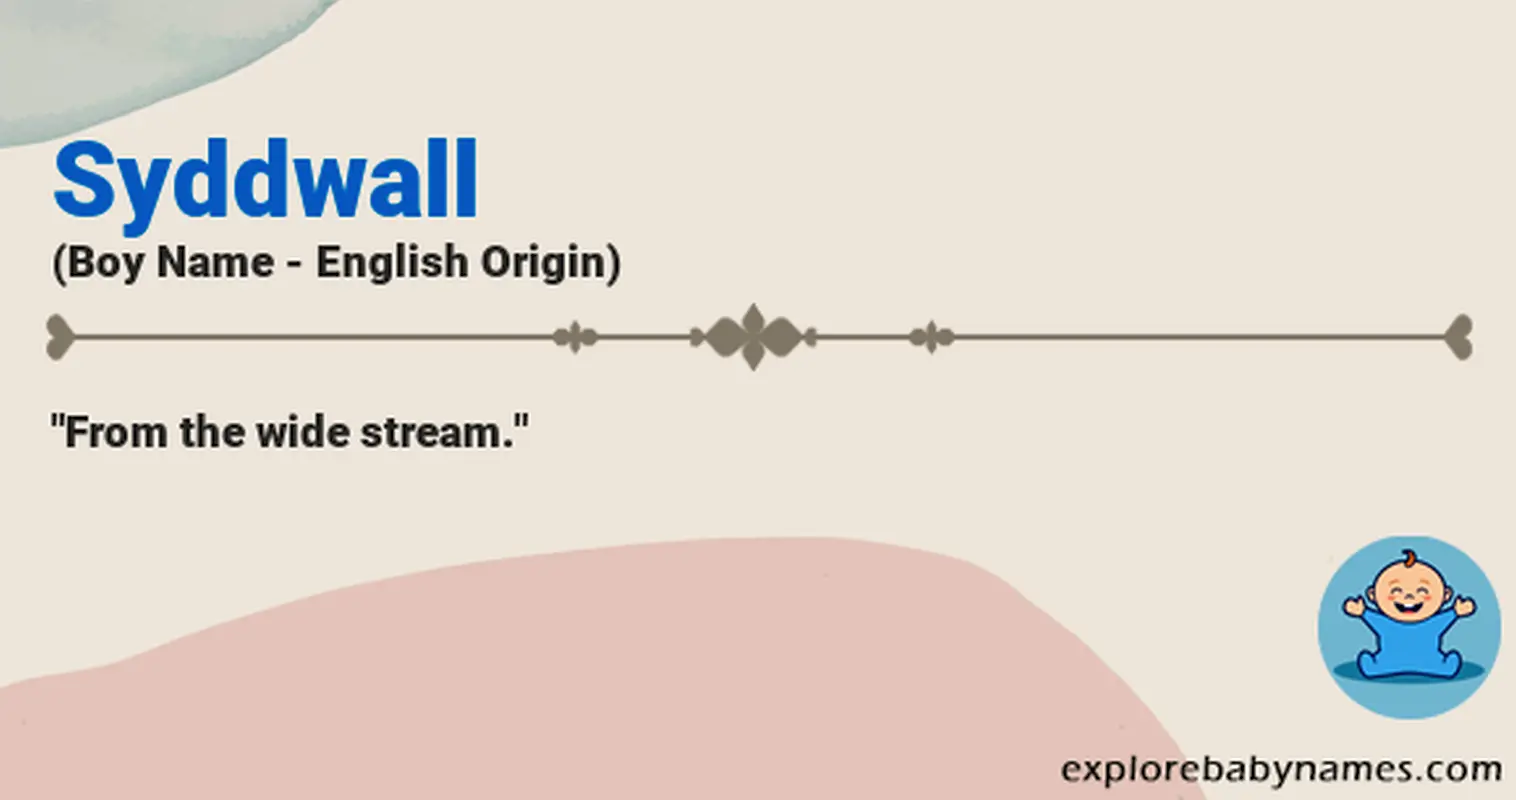 Meaning of Syddwall